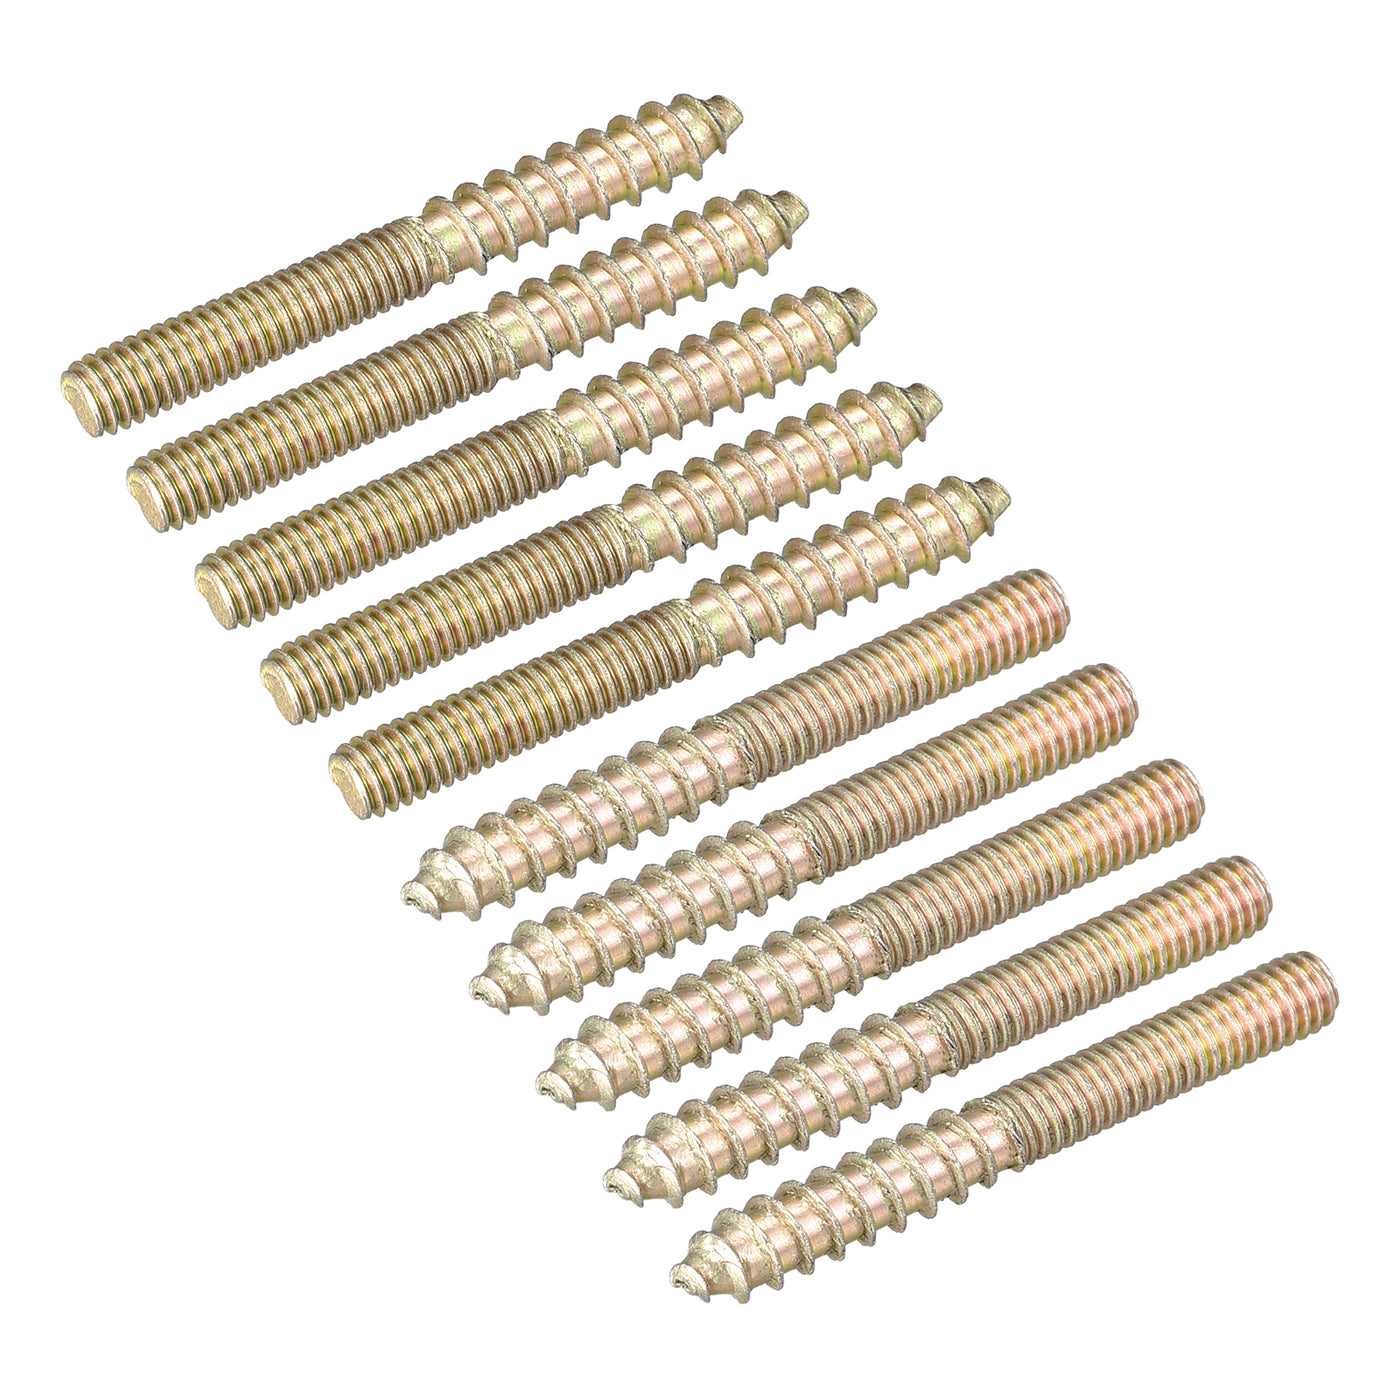 Uxcell Uxcell M4x40mm Hanger Bolts, 50pcs Double Ended Thread Dowel Screws for Wood Furniture